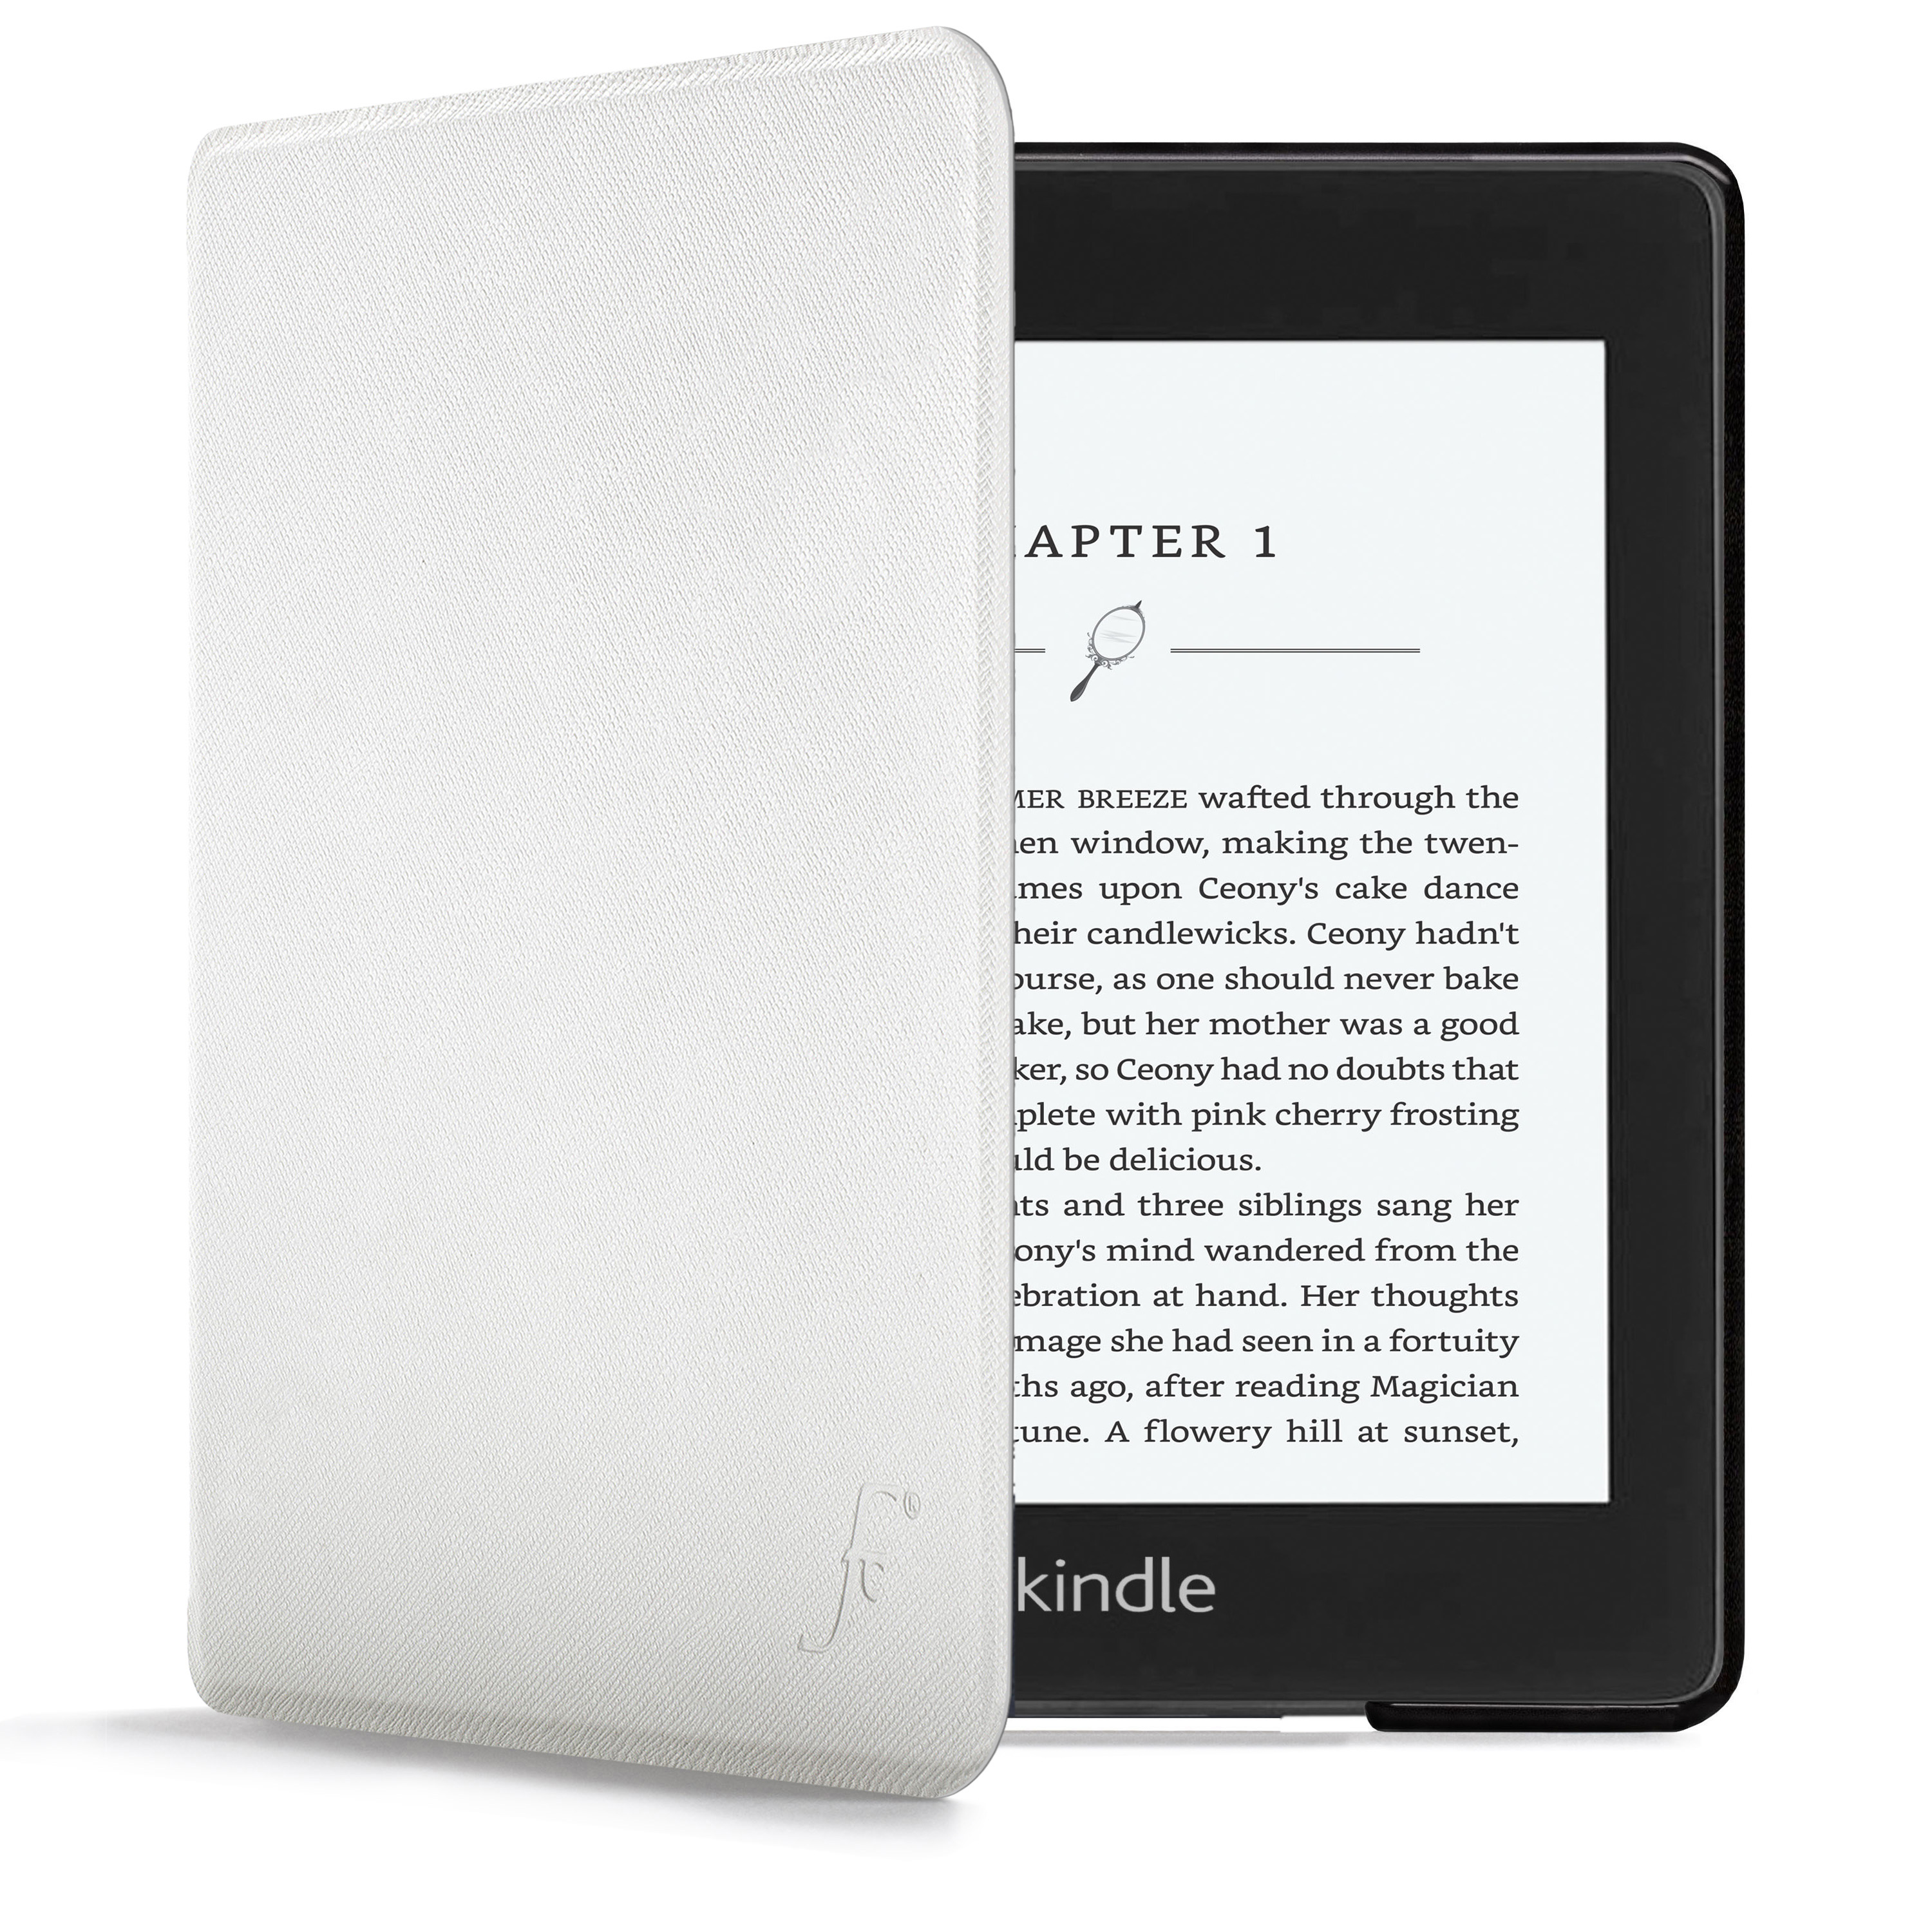 Kindle Paperwhite 2018 Case Cover by Forefront Cases | eBay